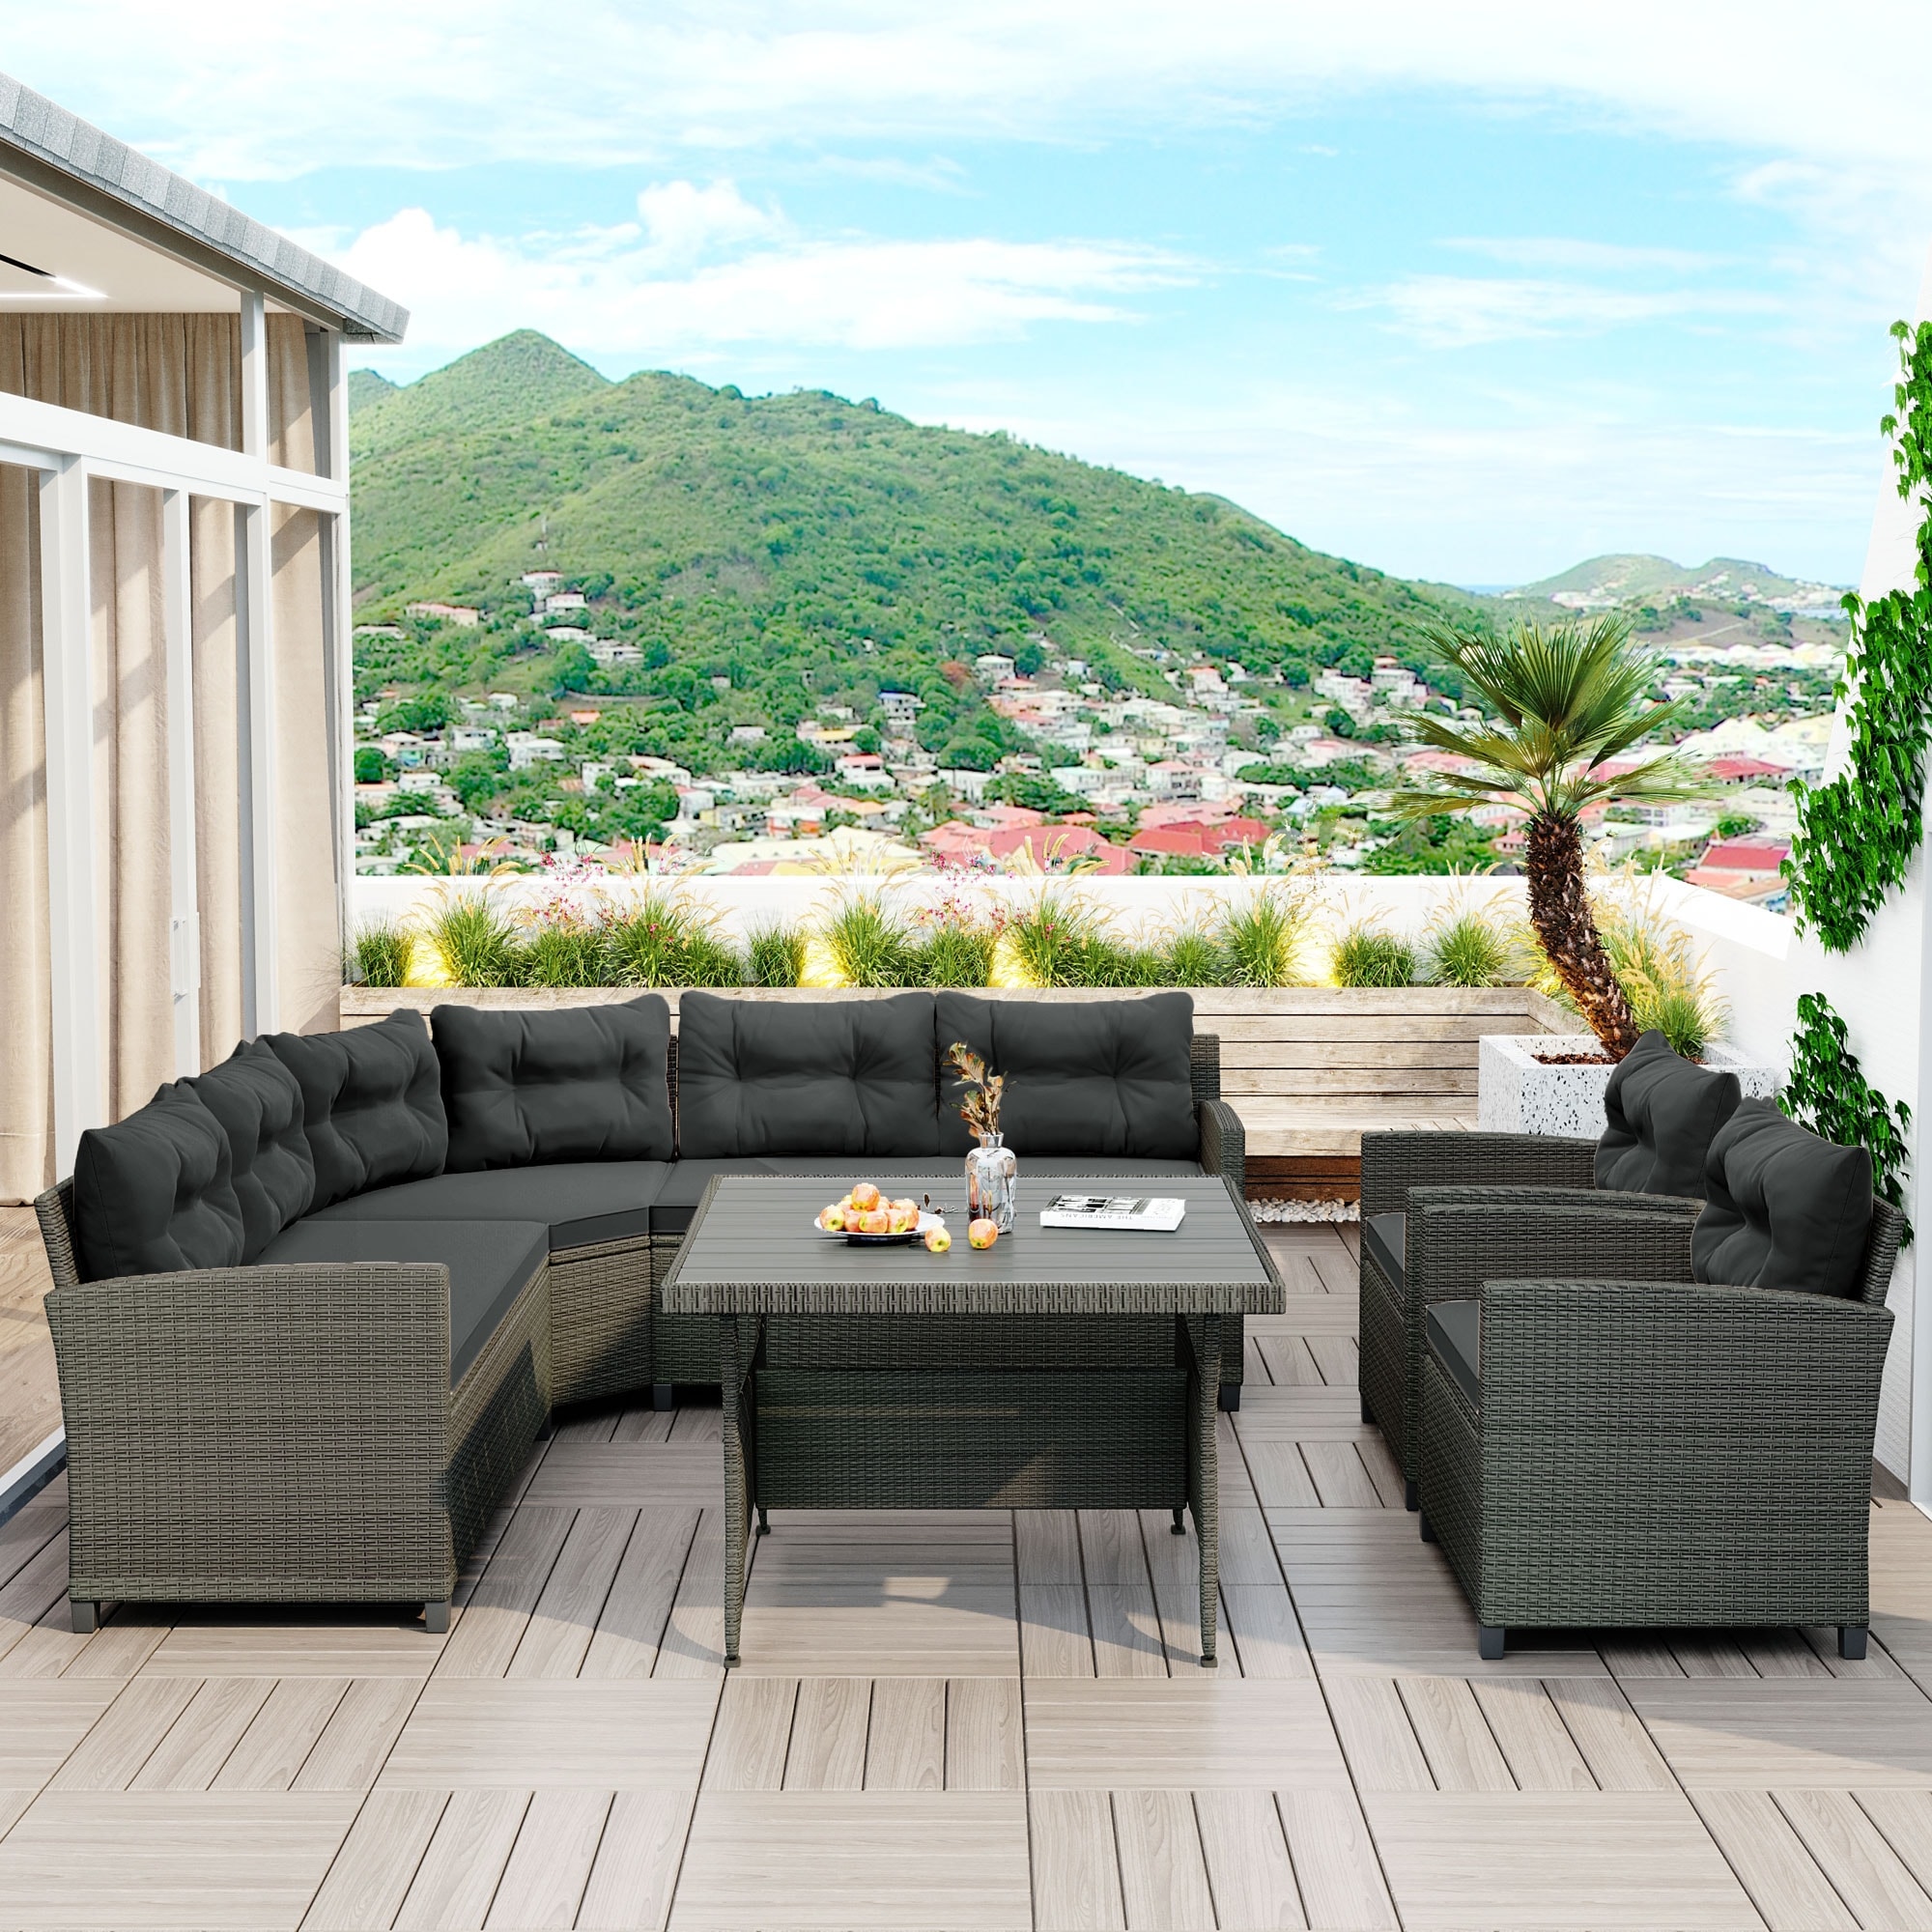 6-piece Outdoor Wicker Sofa Set  Patio Rattan Dinning Set  Sectional Sofa With Thick Cushions And Pillows